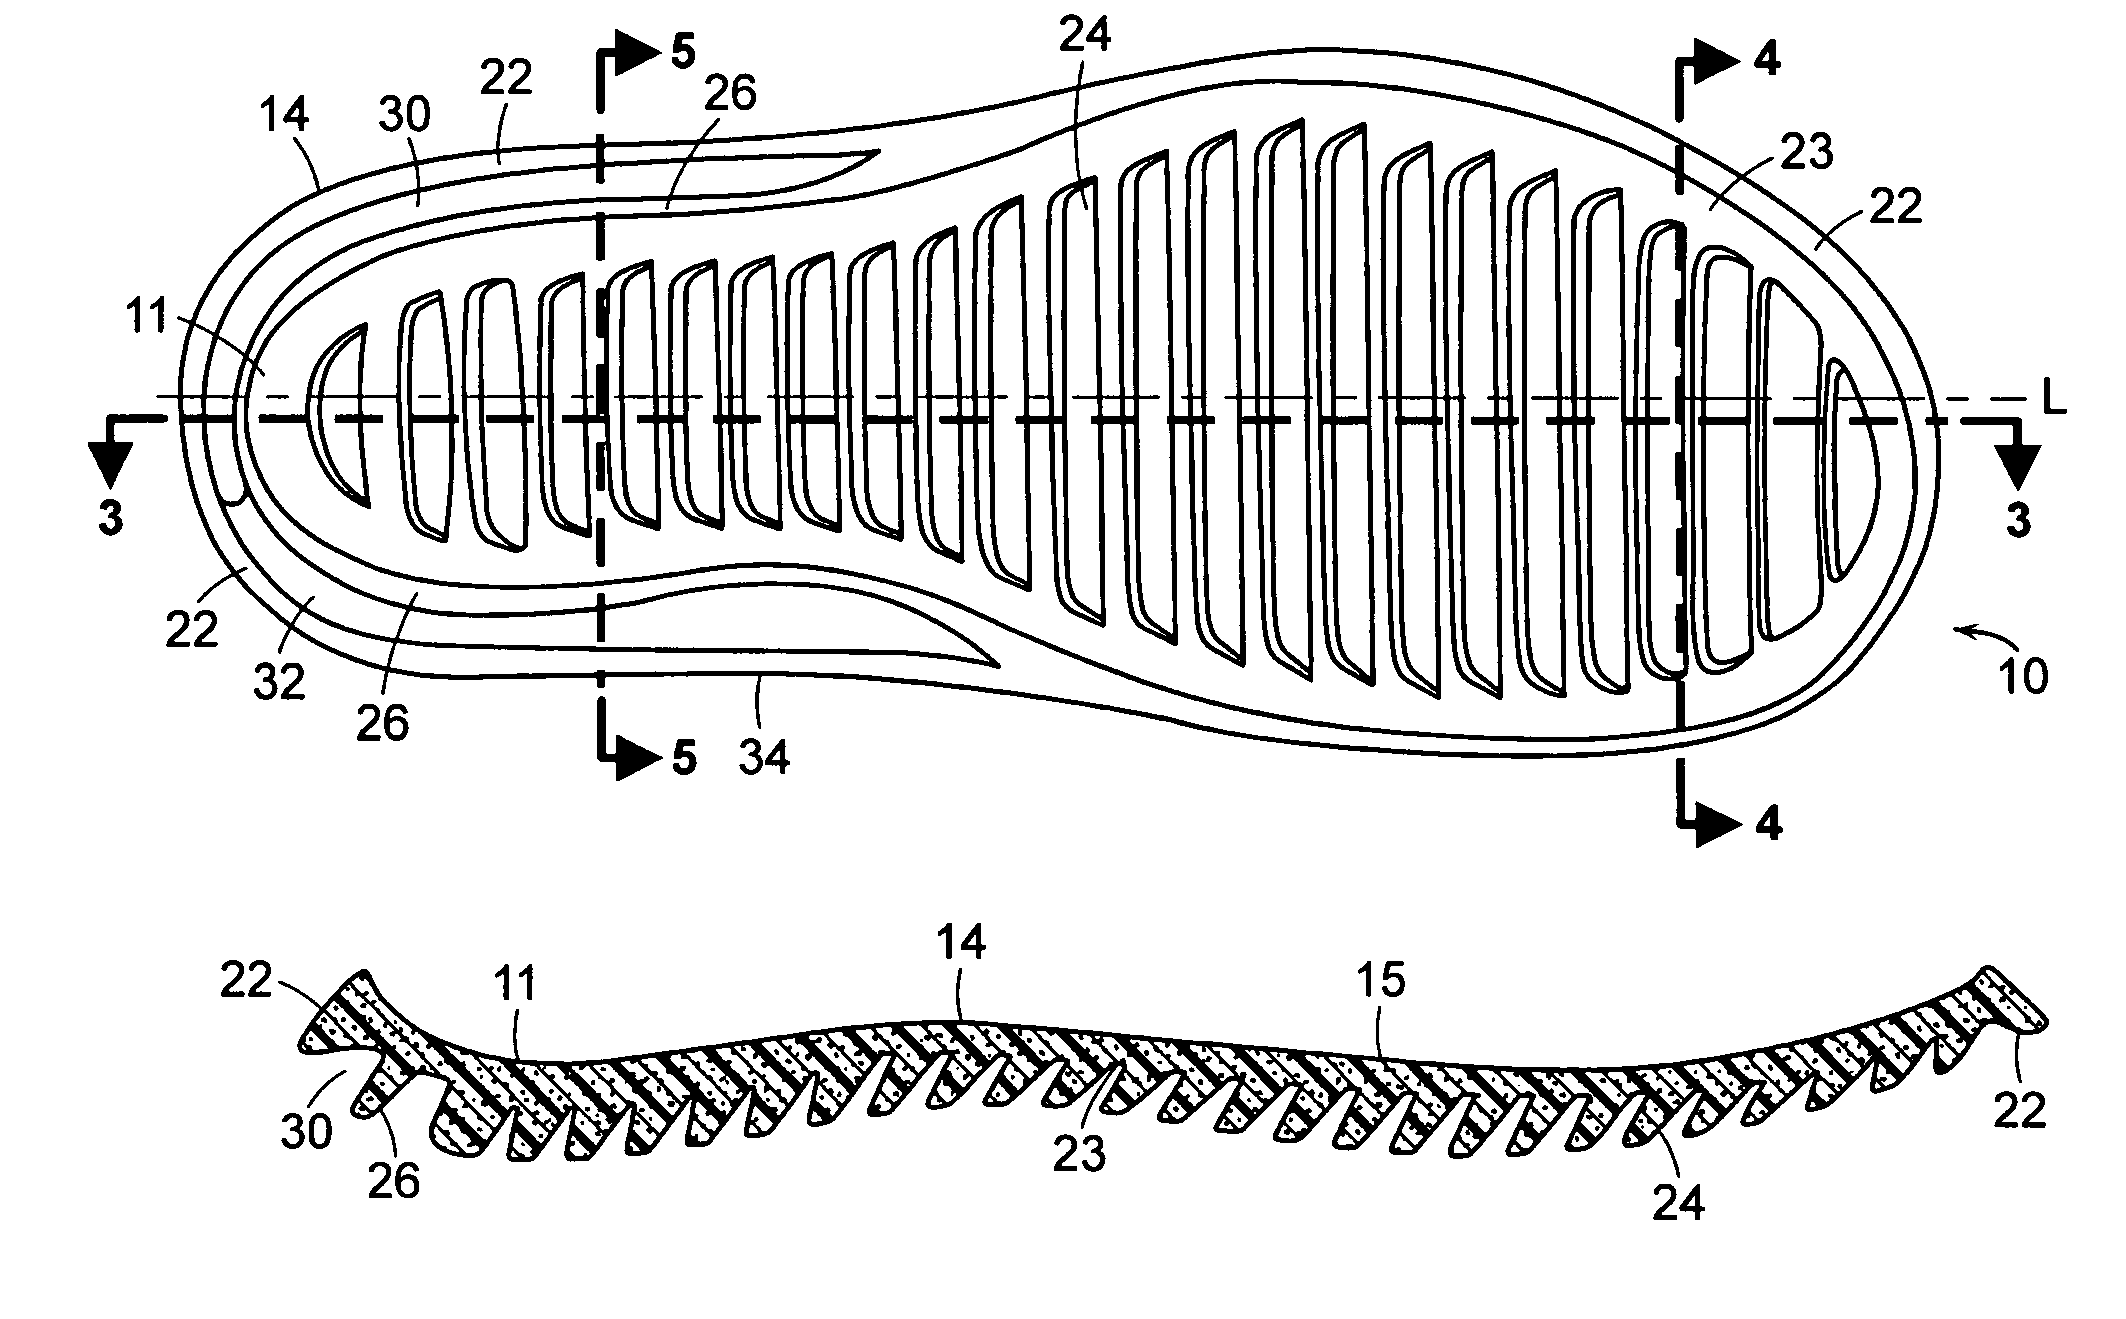 Sole for article of footwear for sand surfaces